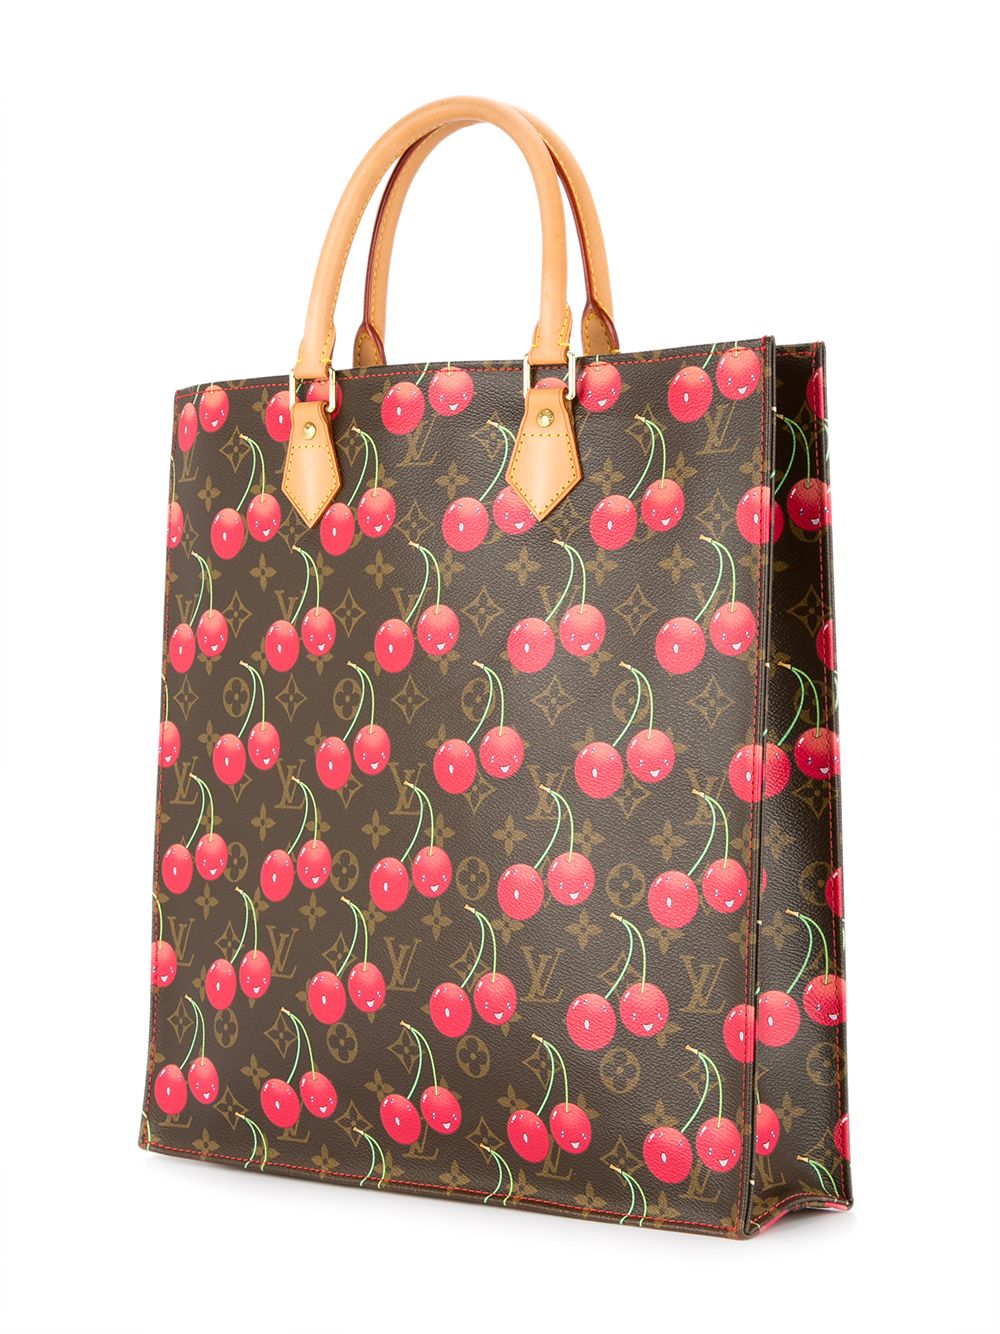 A Louis Vuitton Cherry Pattern Theda Bag From The